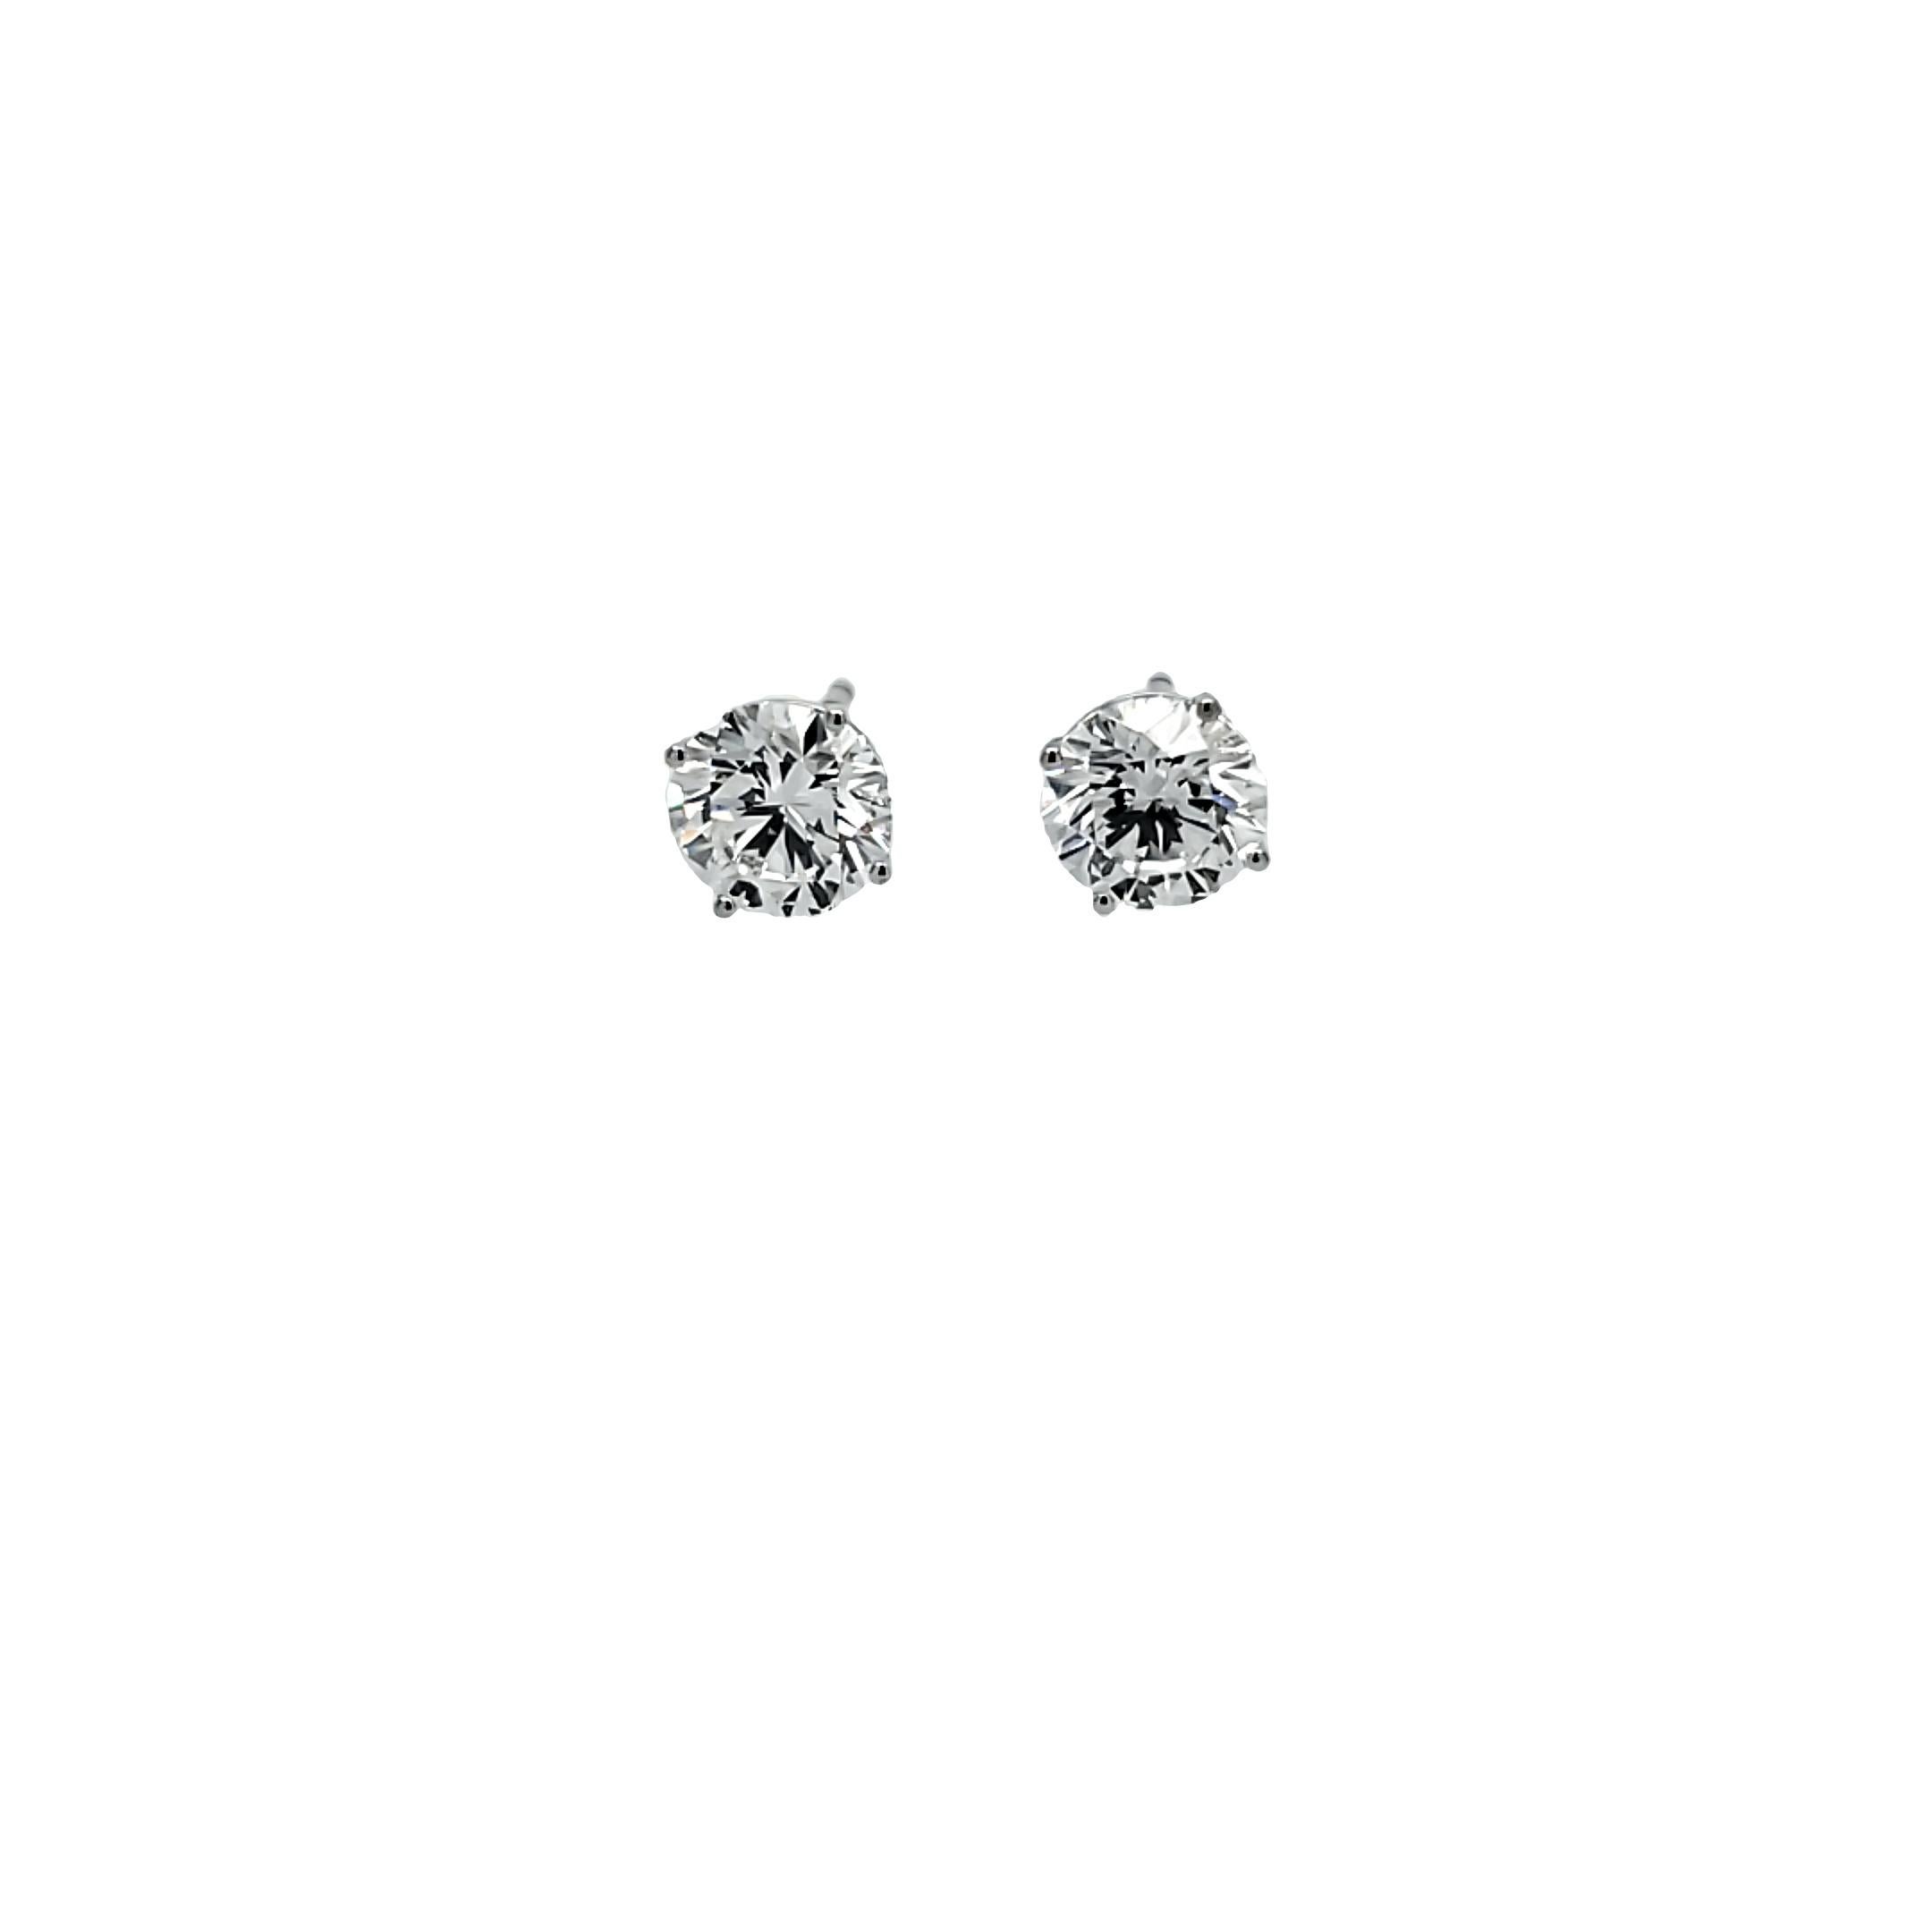 Rosenberg Diamonds & Co. 4.02 total carat weight E color VVS2 clarity triple excellent GIA Certified is the perfect pair of diamond studs. We have a large selection of GIA Certified studs from 2 carat total weight to 20 carat total weight. 

Love